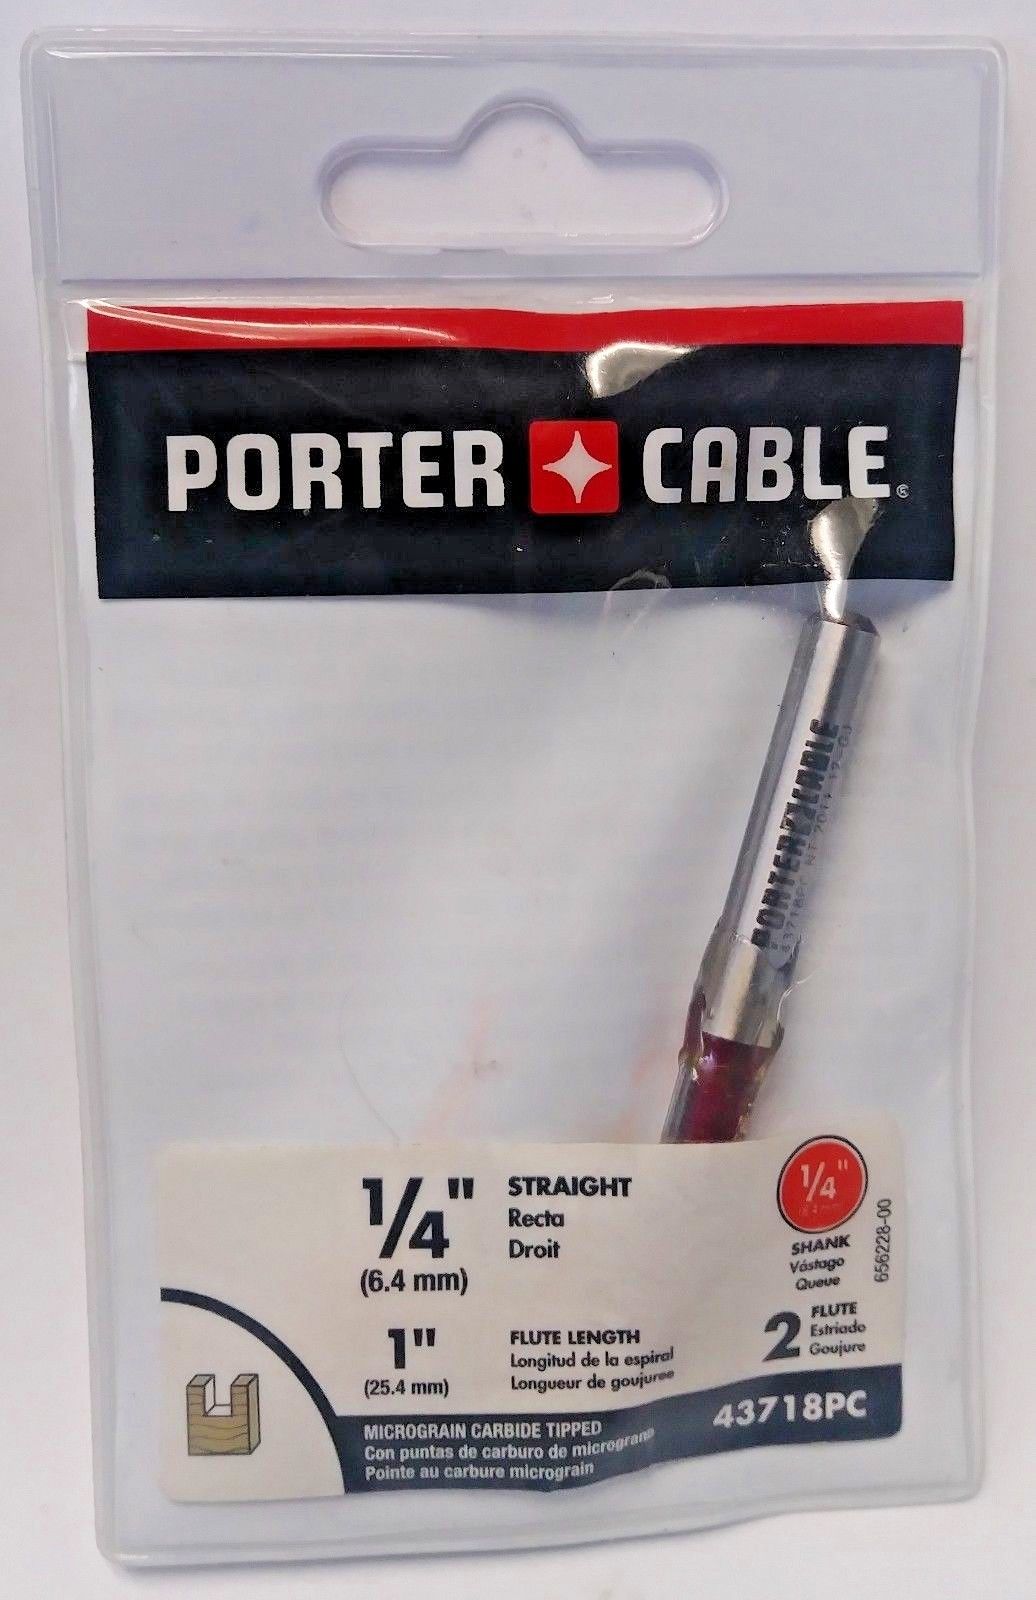 Porter Cable 43718 1/4" Straight Double Flute Router Bit Carbide Tipped